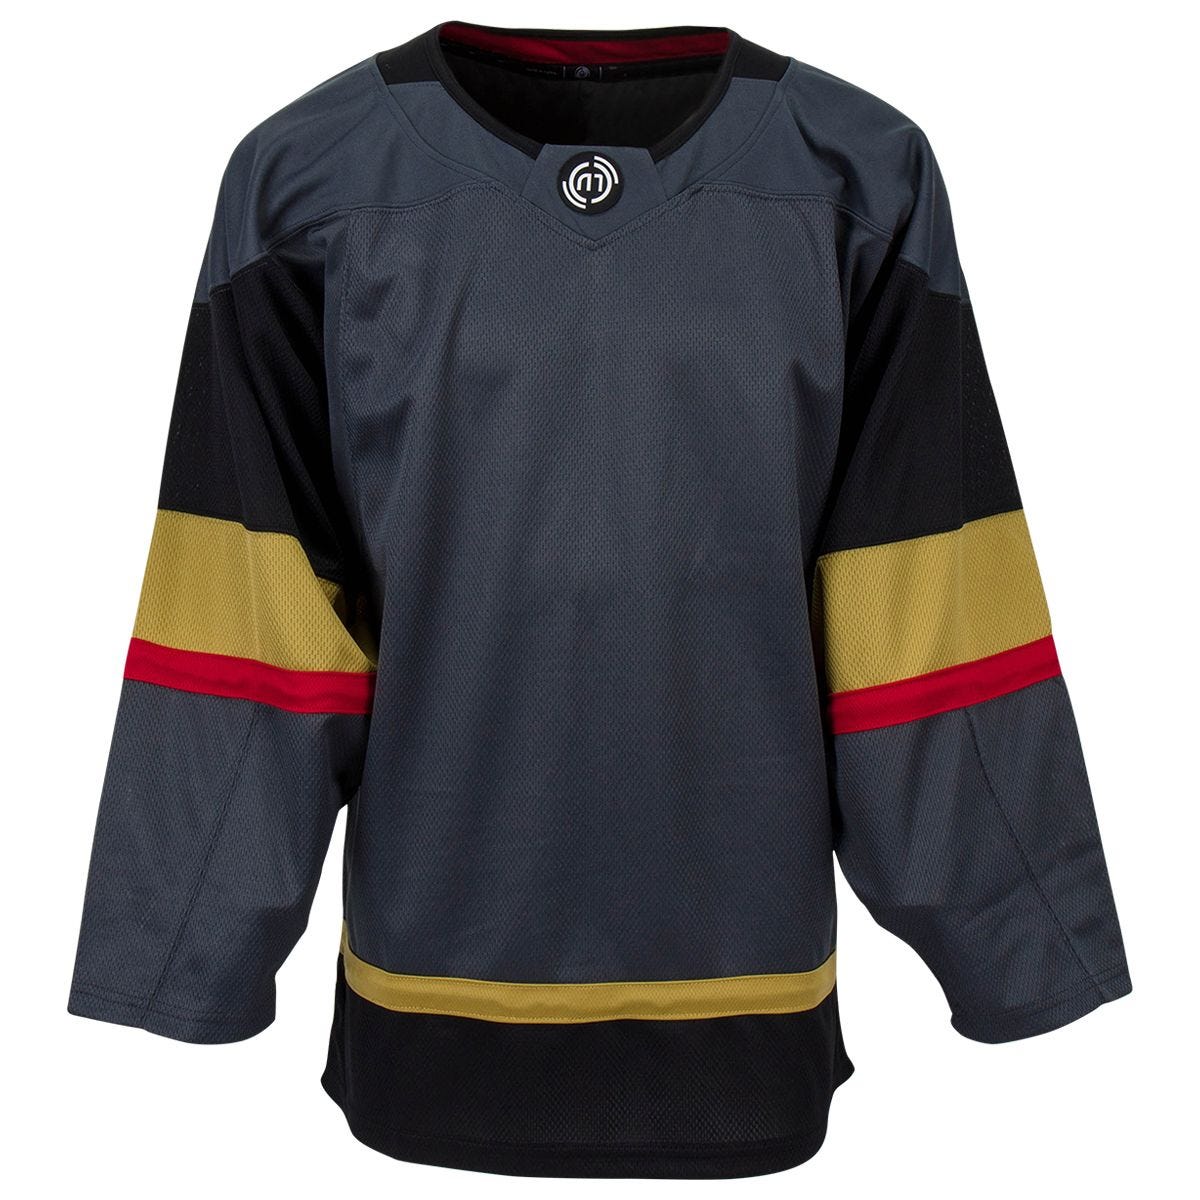 Vegas Golden Knights on X: Both jerseys that we will wear in our